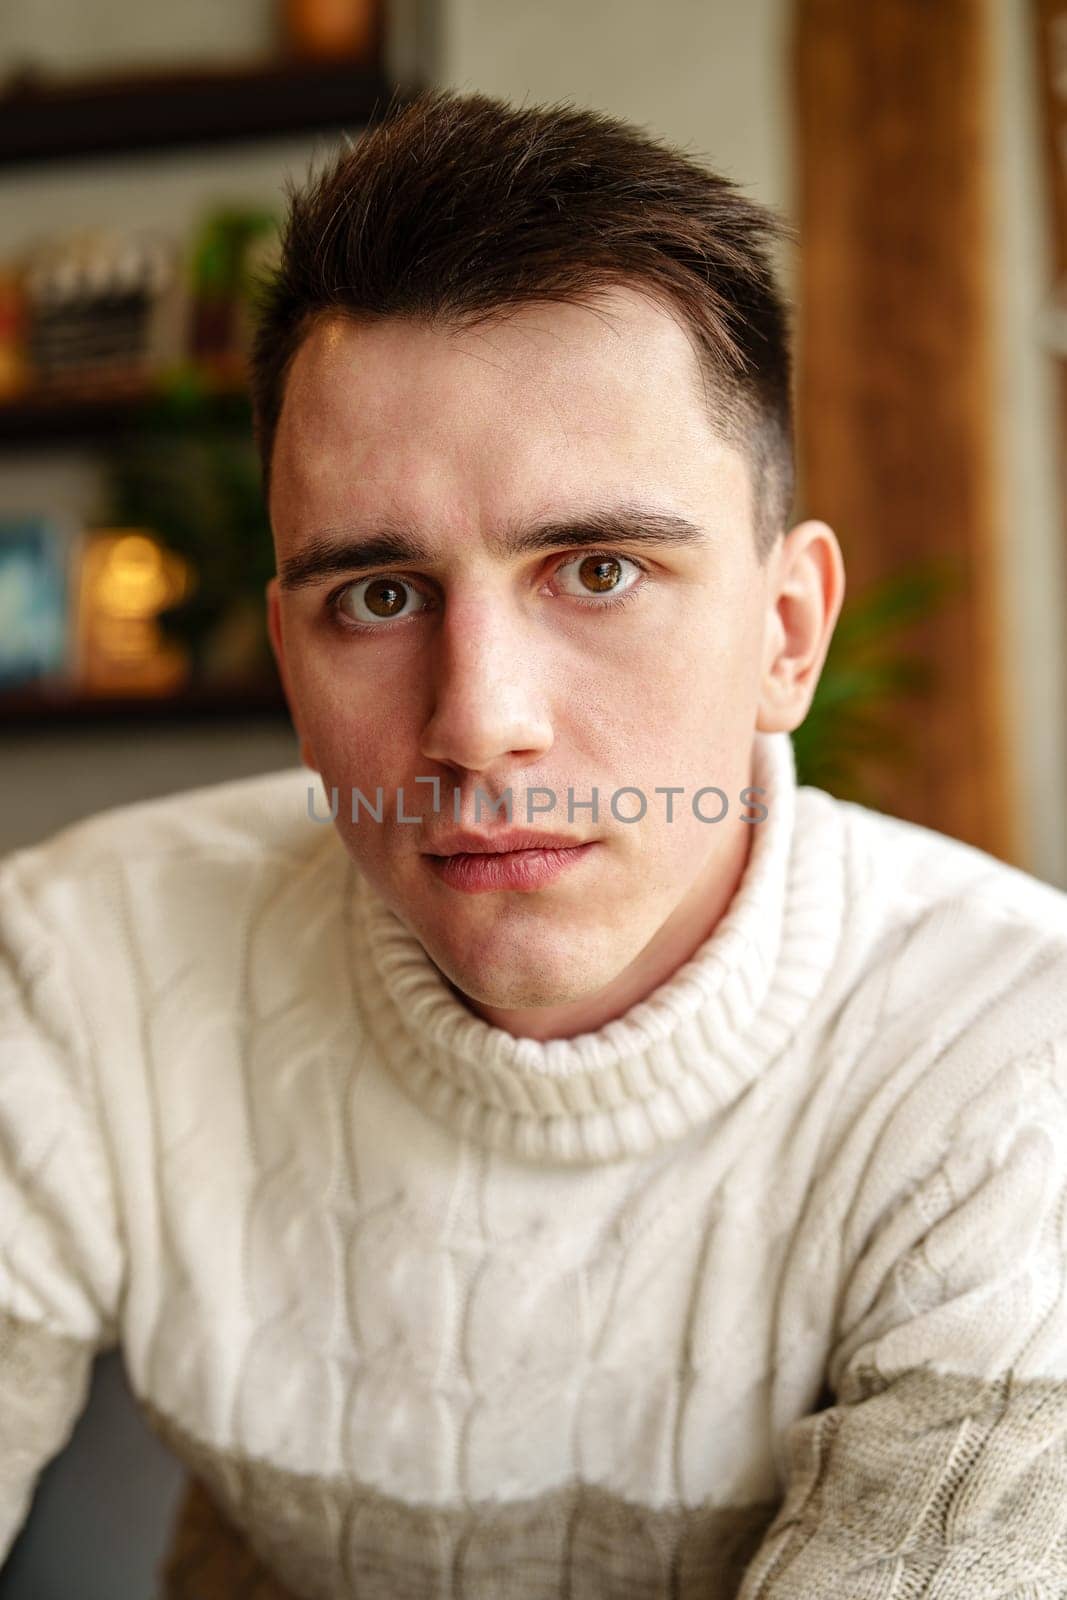 A male individual wearing a white sweater is directly facing the camera, making eye contact with the viewer. He appears to be posing for a portrait, with a neutral expression on his face.